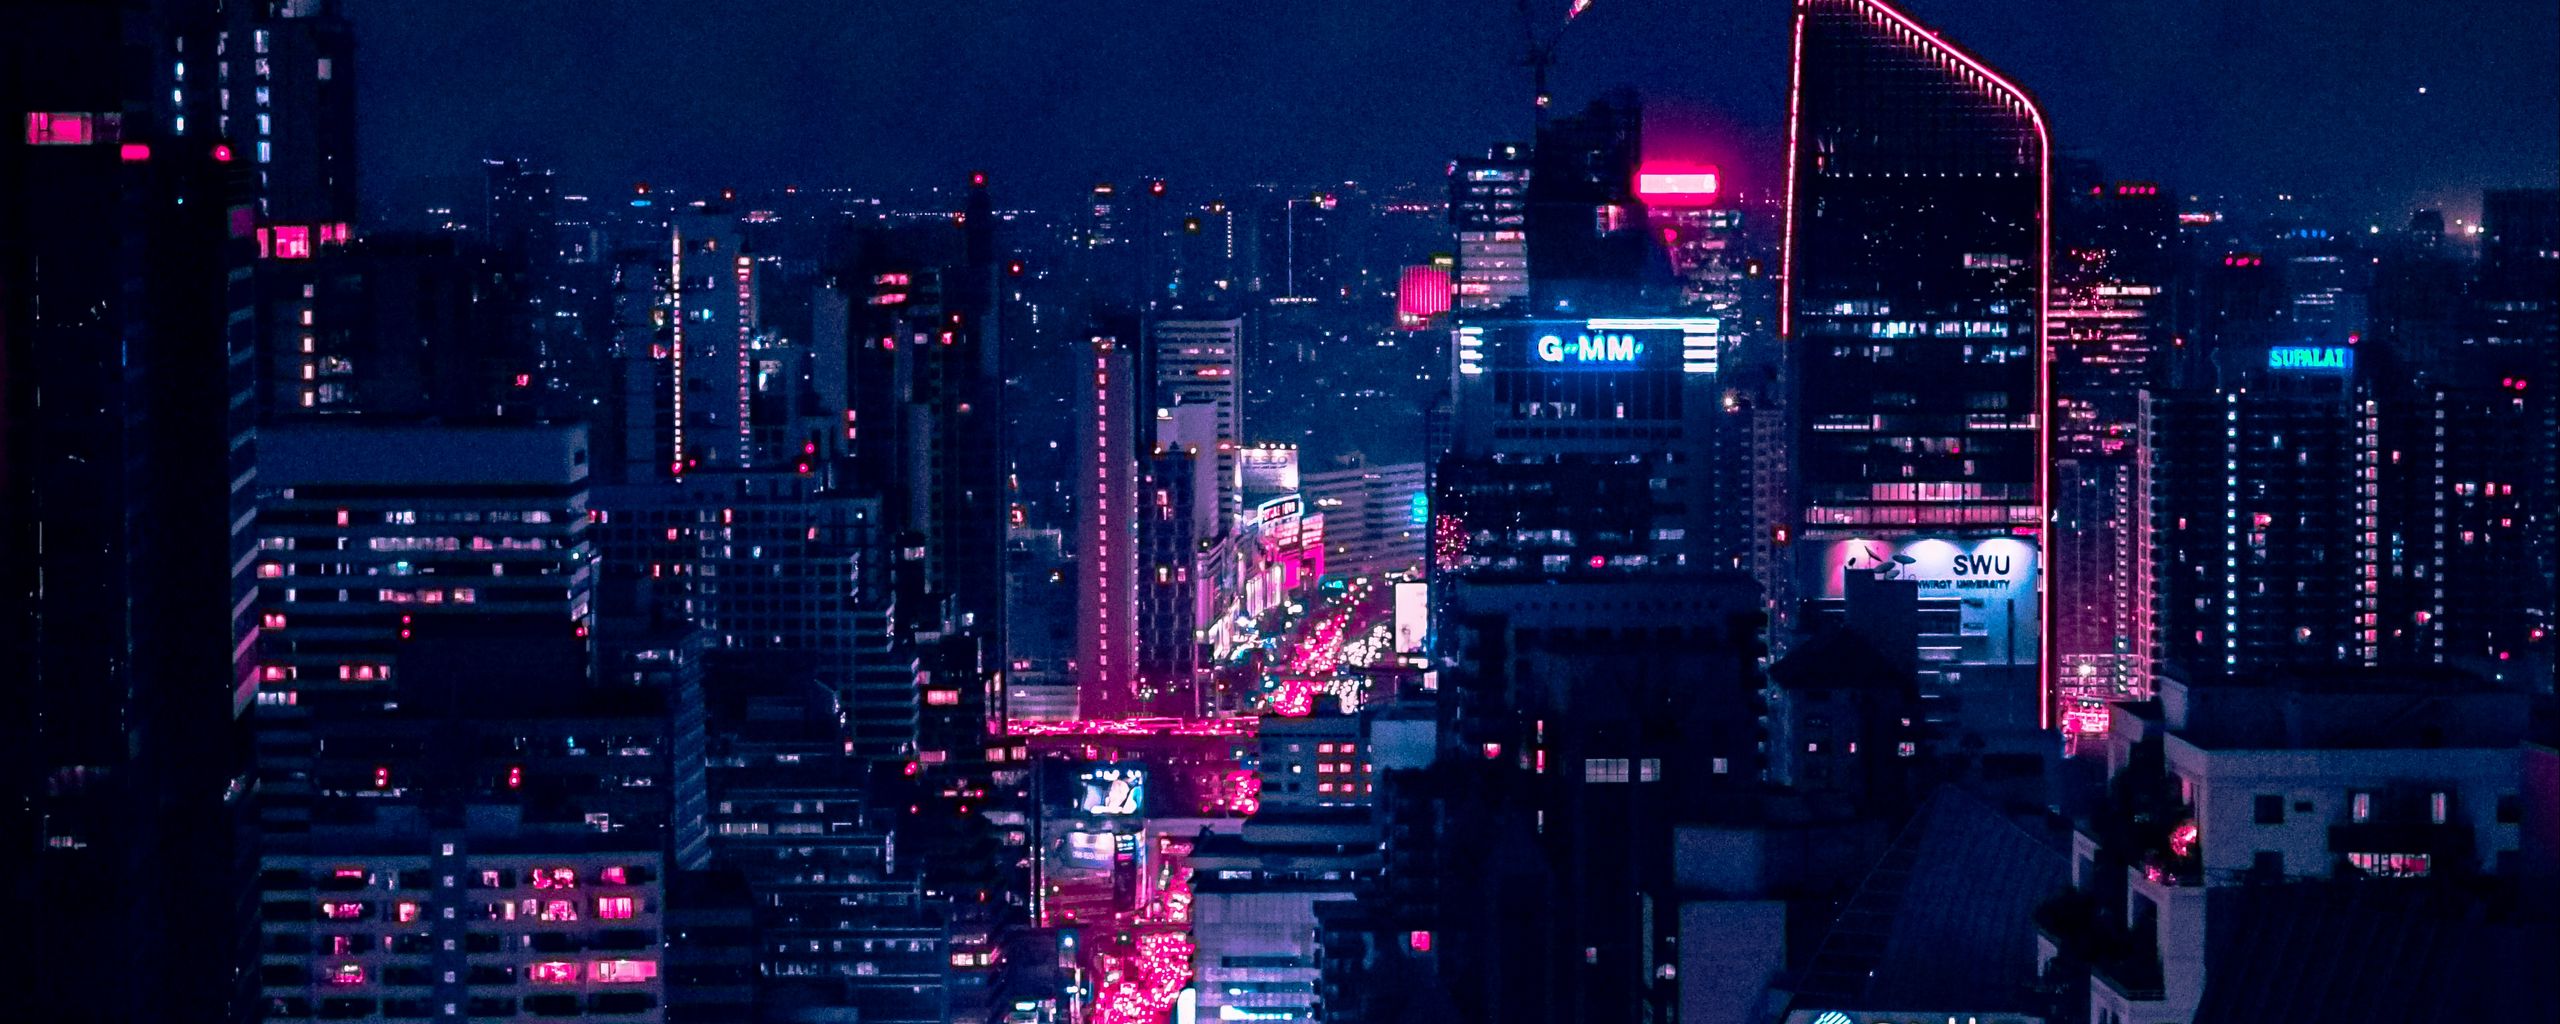 Download wallpaper 2560x1024 night city, city lights, aerial view ...